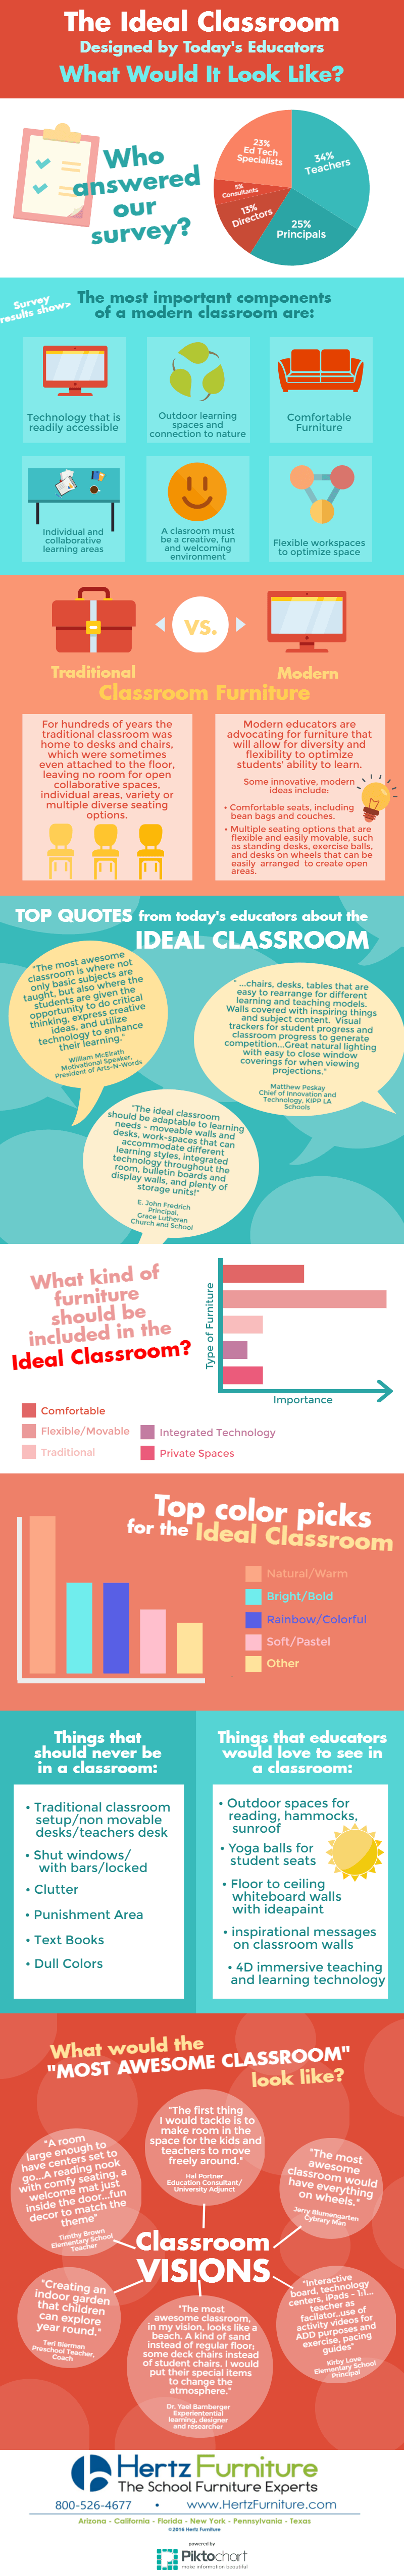 Designing The Ideal Classroom Infographic